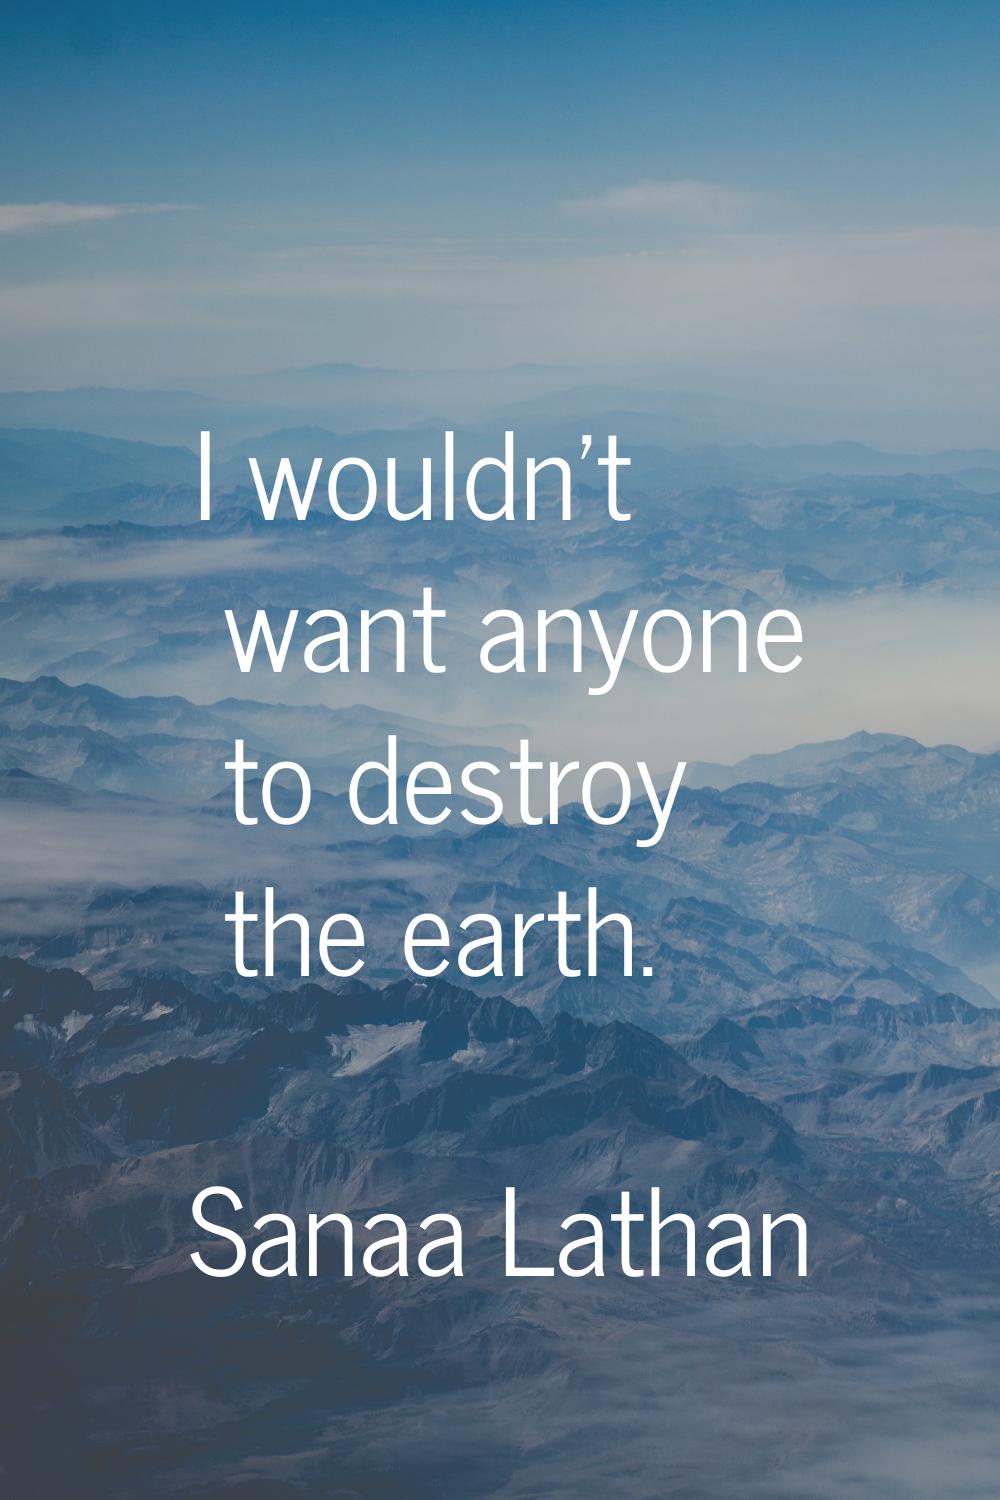 I wouldn't want anyone to destroy the earth.